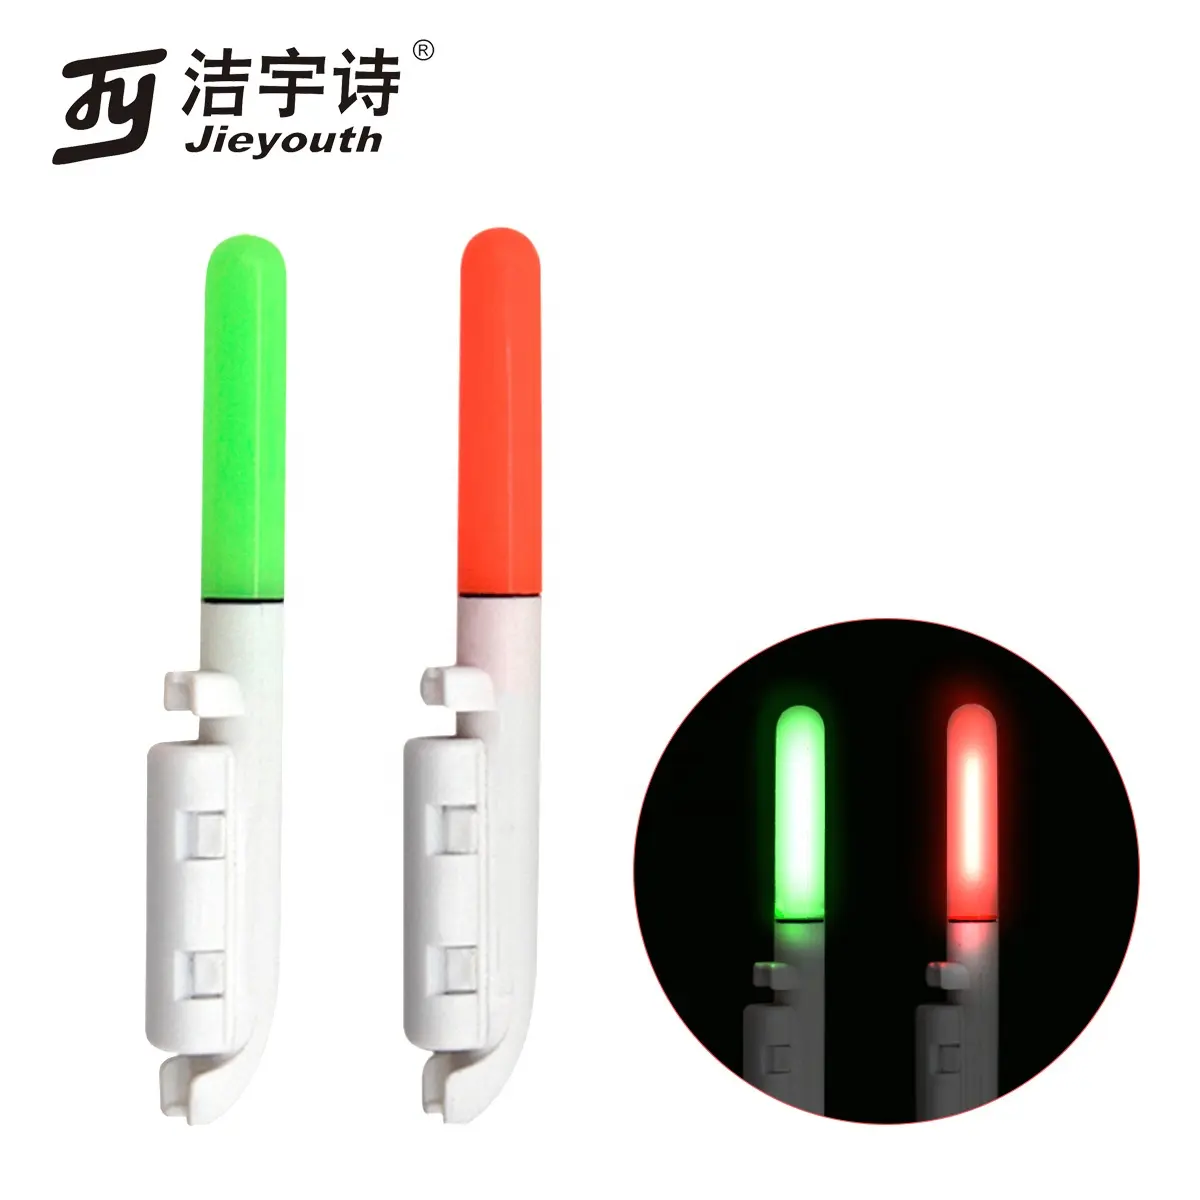 Customized night fishing rod tip light is always on GSD red/green LED fishing rod light